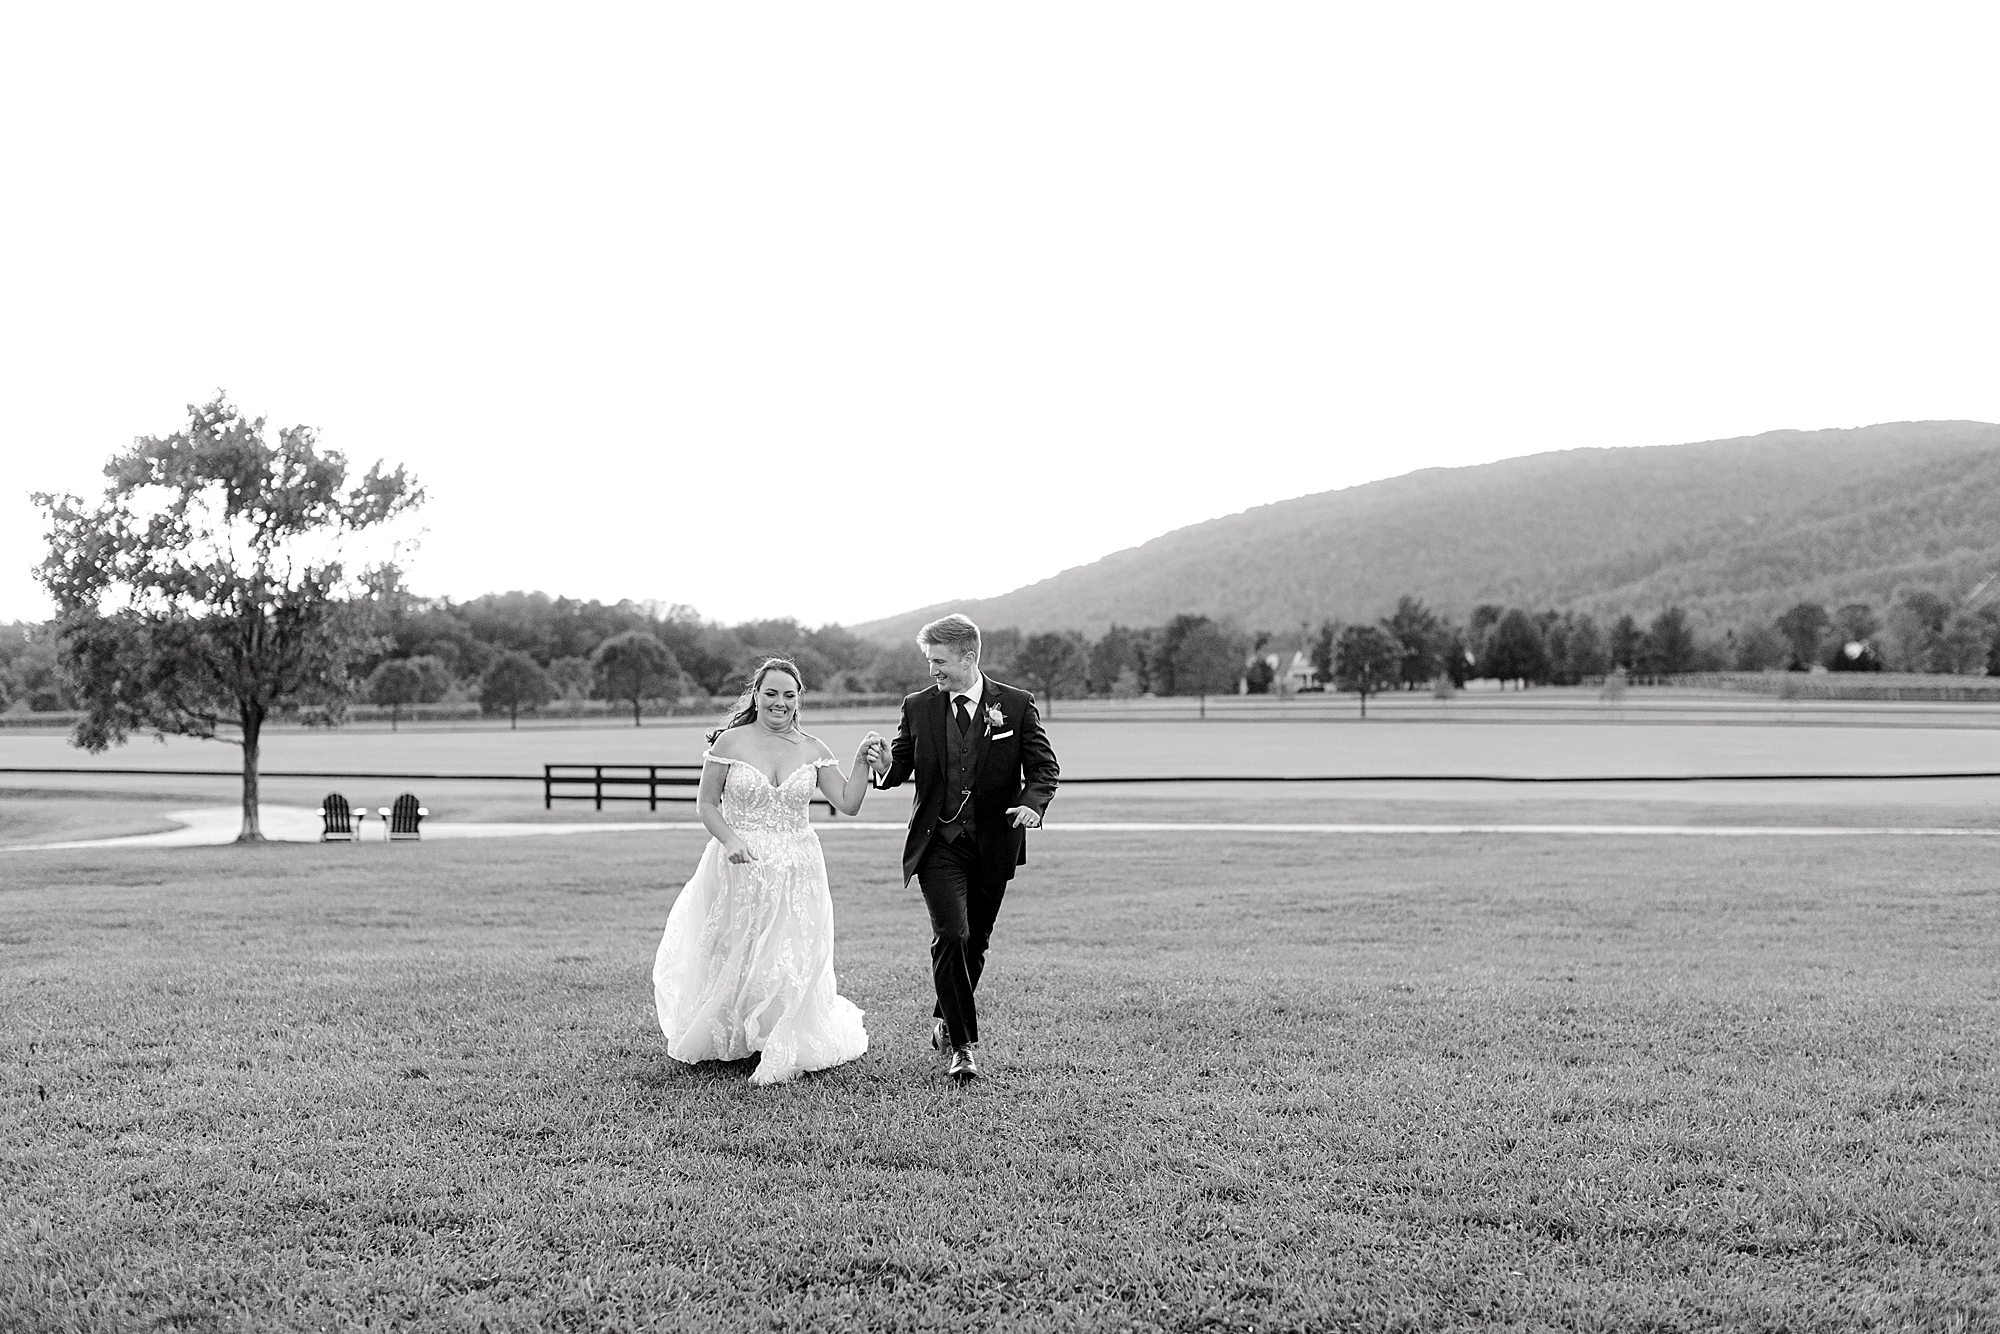 King Family Vineyard wedding with bride and groom running towards camera.